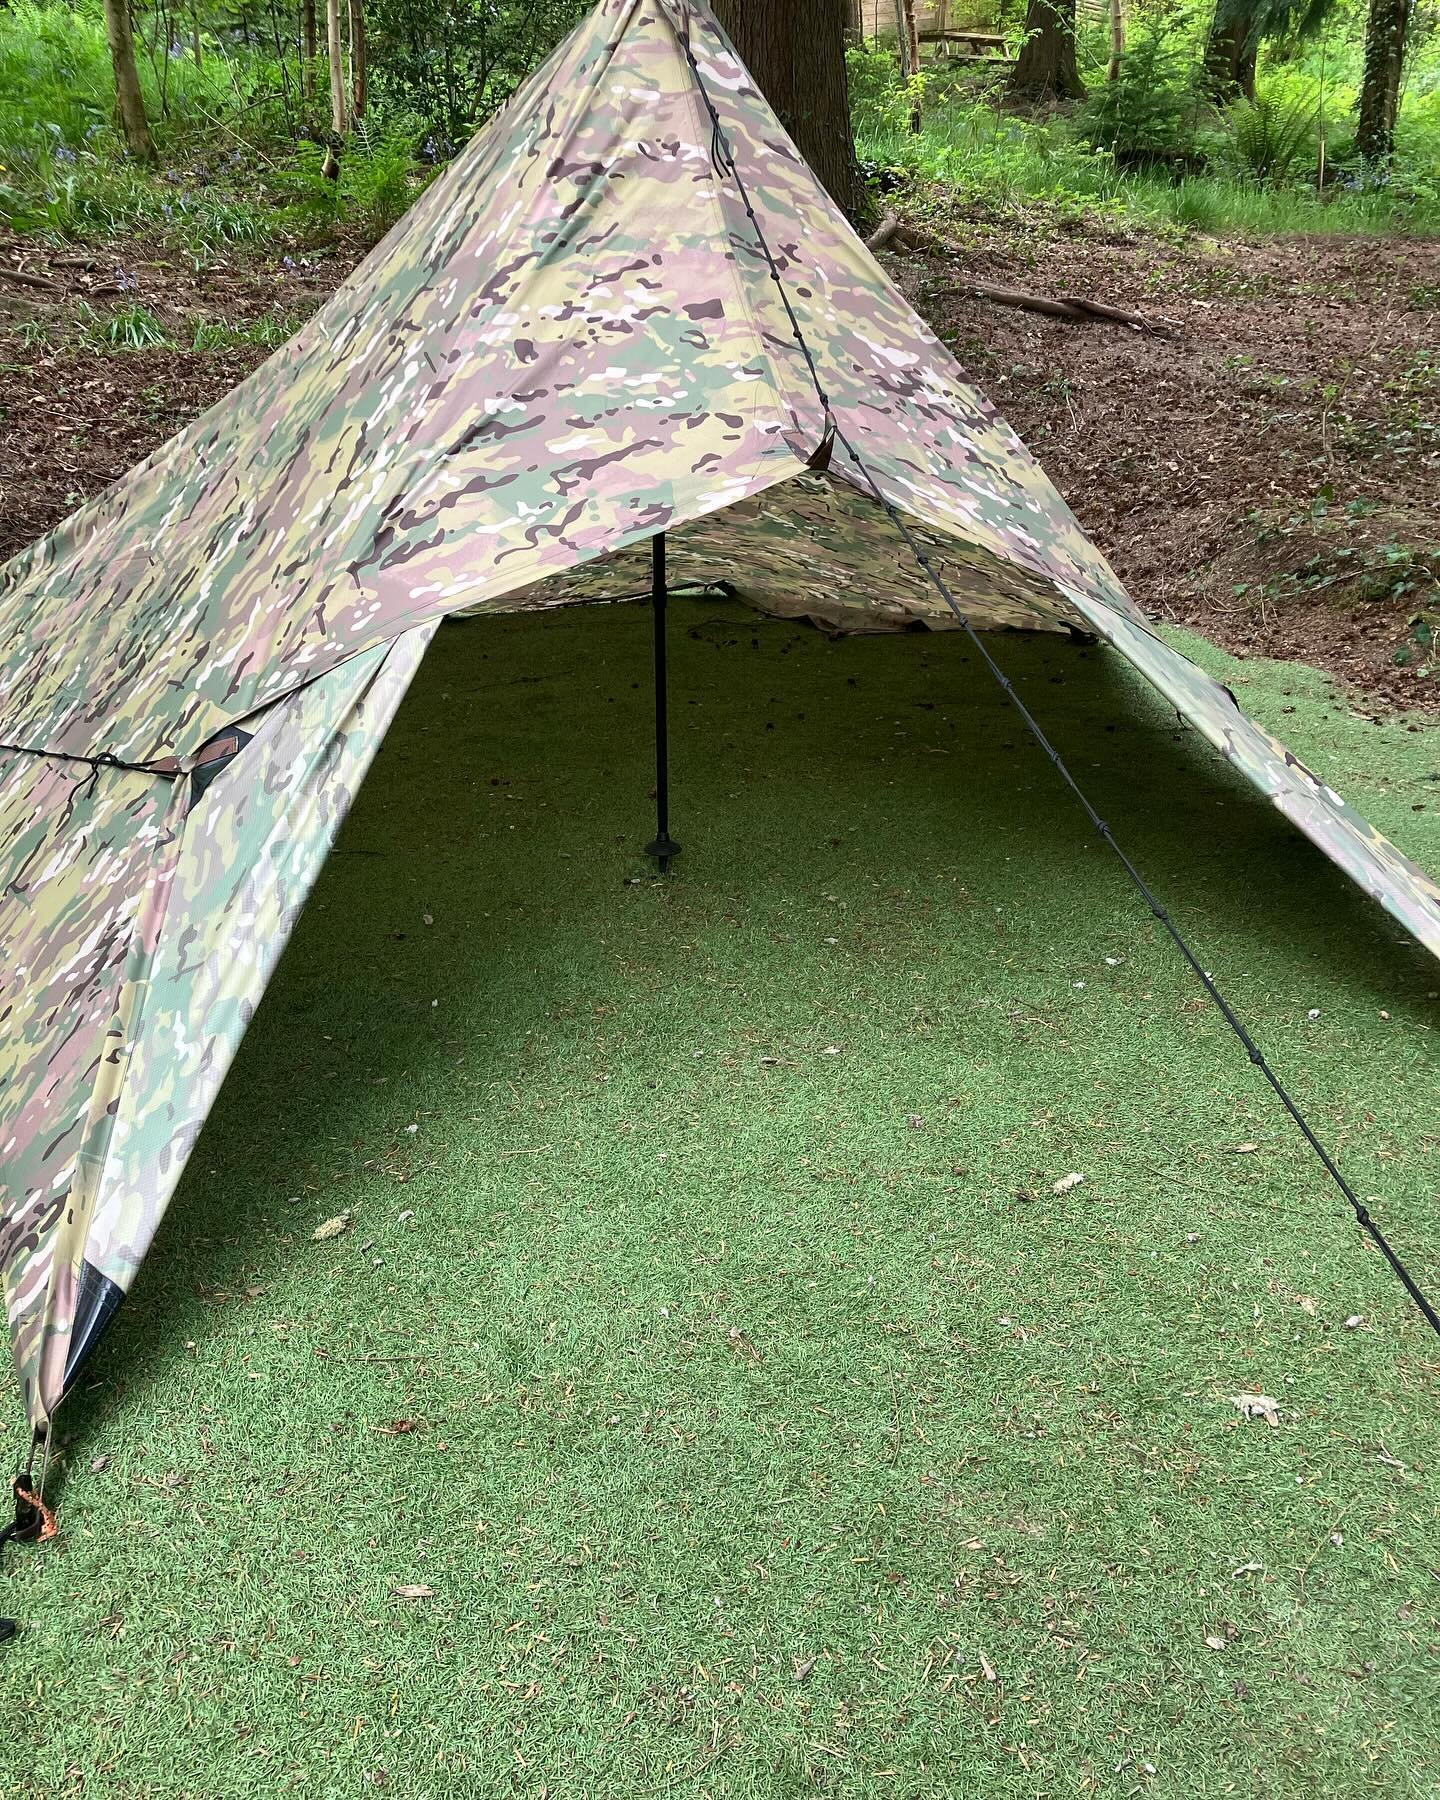 Testing out the new 3x3 tarp from @trcoutdoors with a few different configurations. #ukmade🇬🇧 #veteranowned 

#wildcampinguk #wildcamping #bugout #midwales #cambrianmountains #shtf #survival #survivalgear #emergencypreparedness #prepping #preppers 